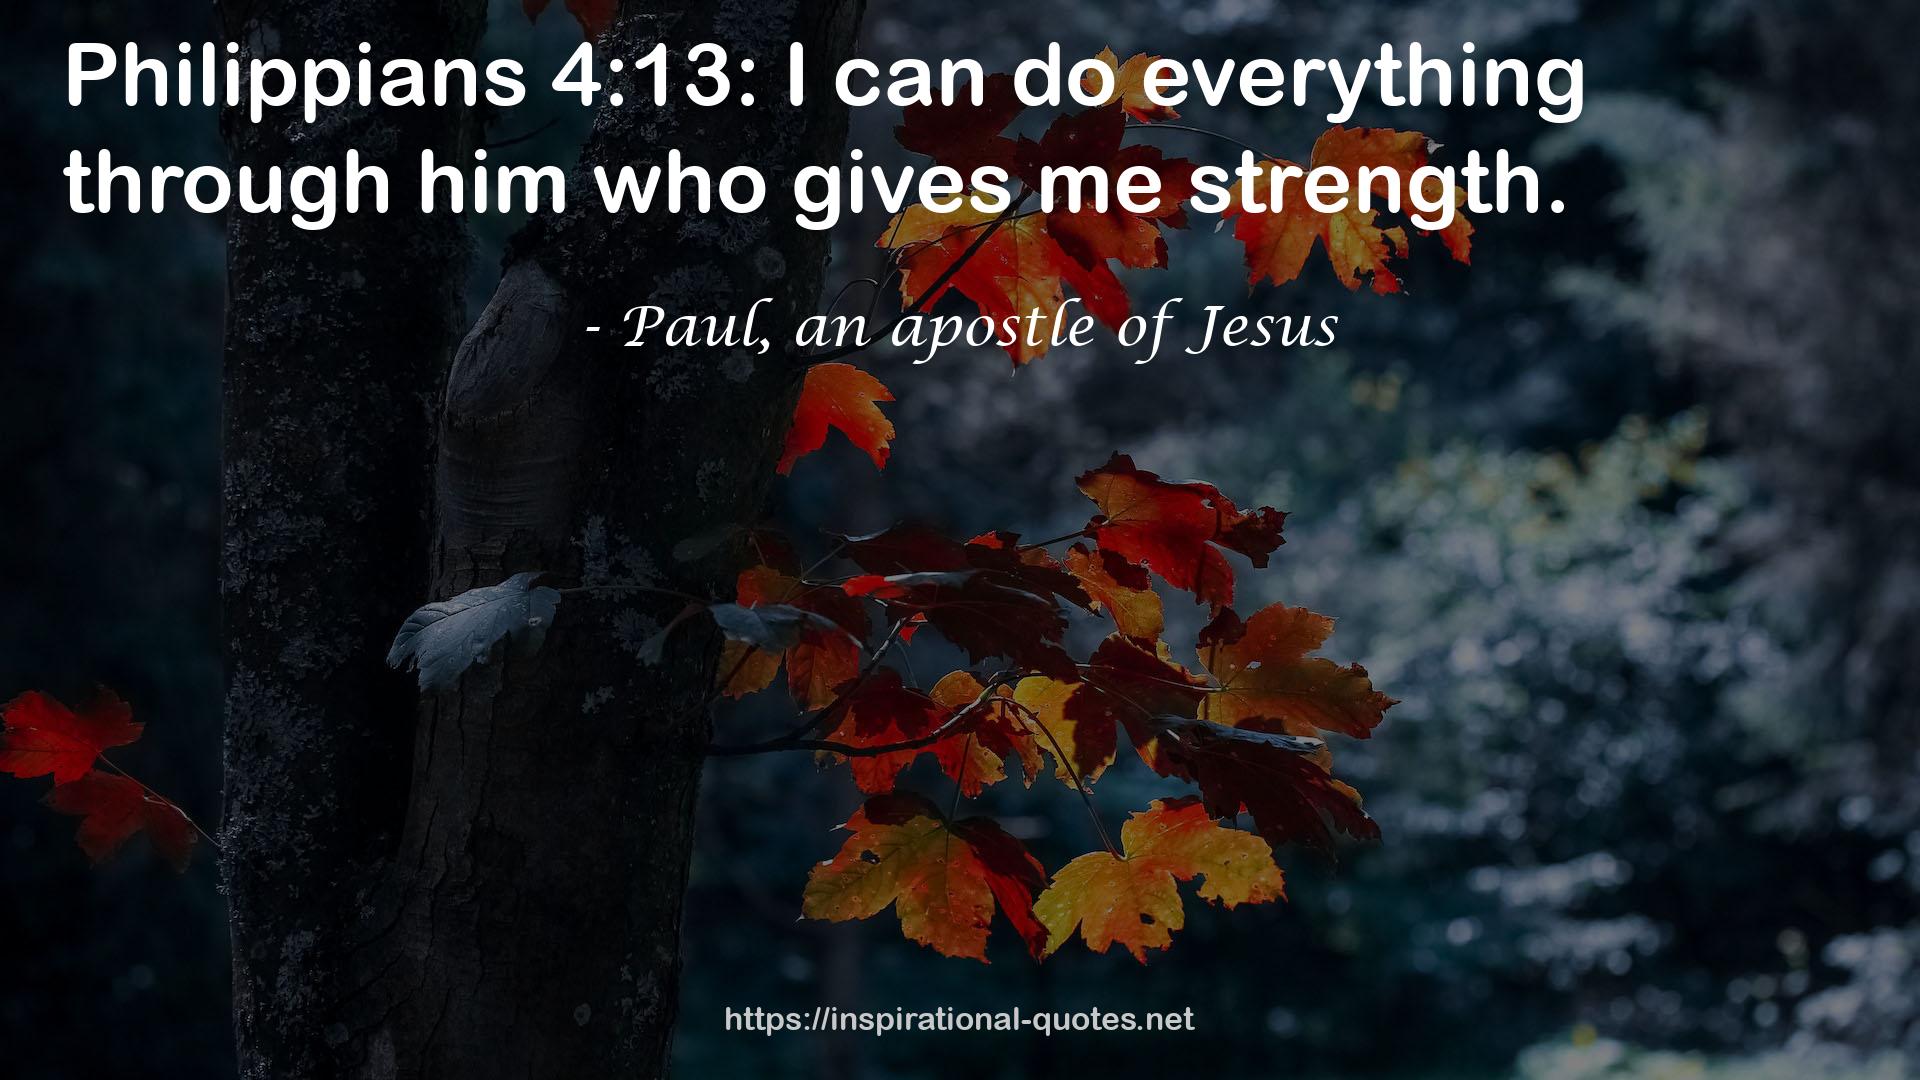 Paul, an apostle of Jesus QUOTES